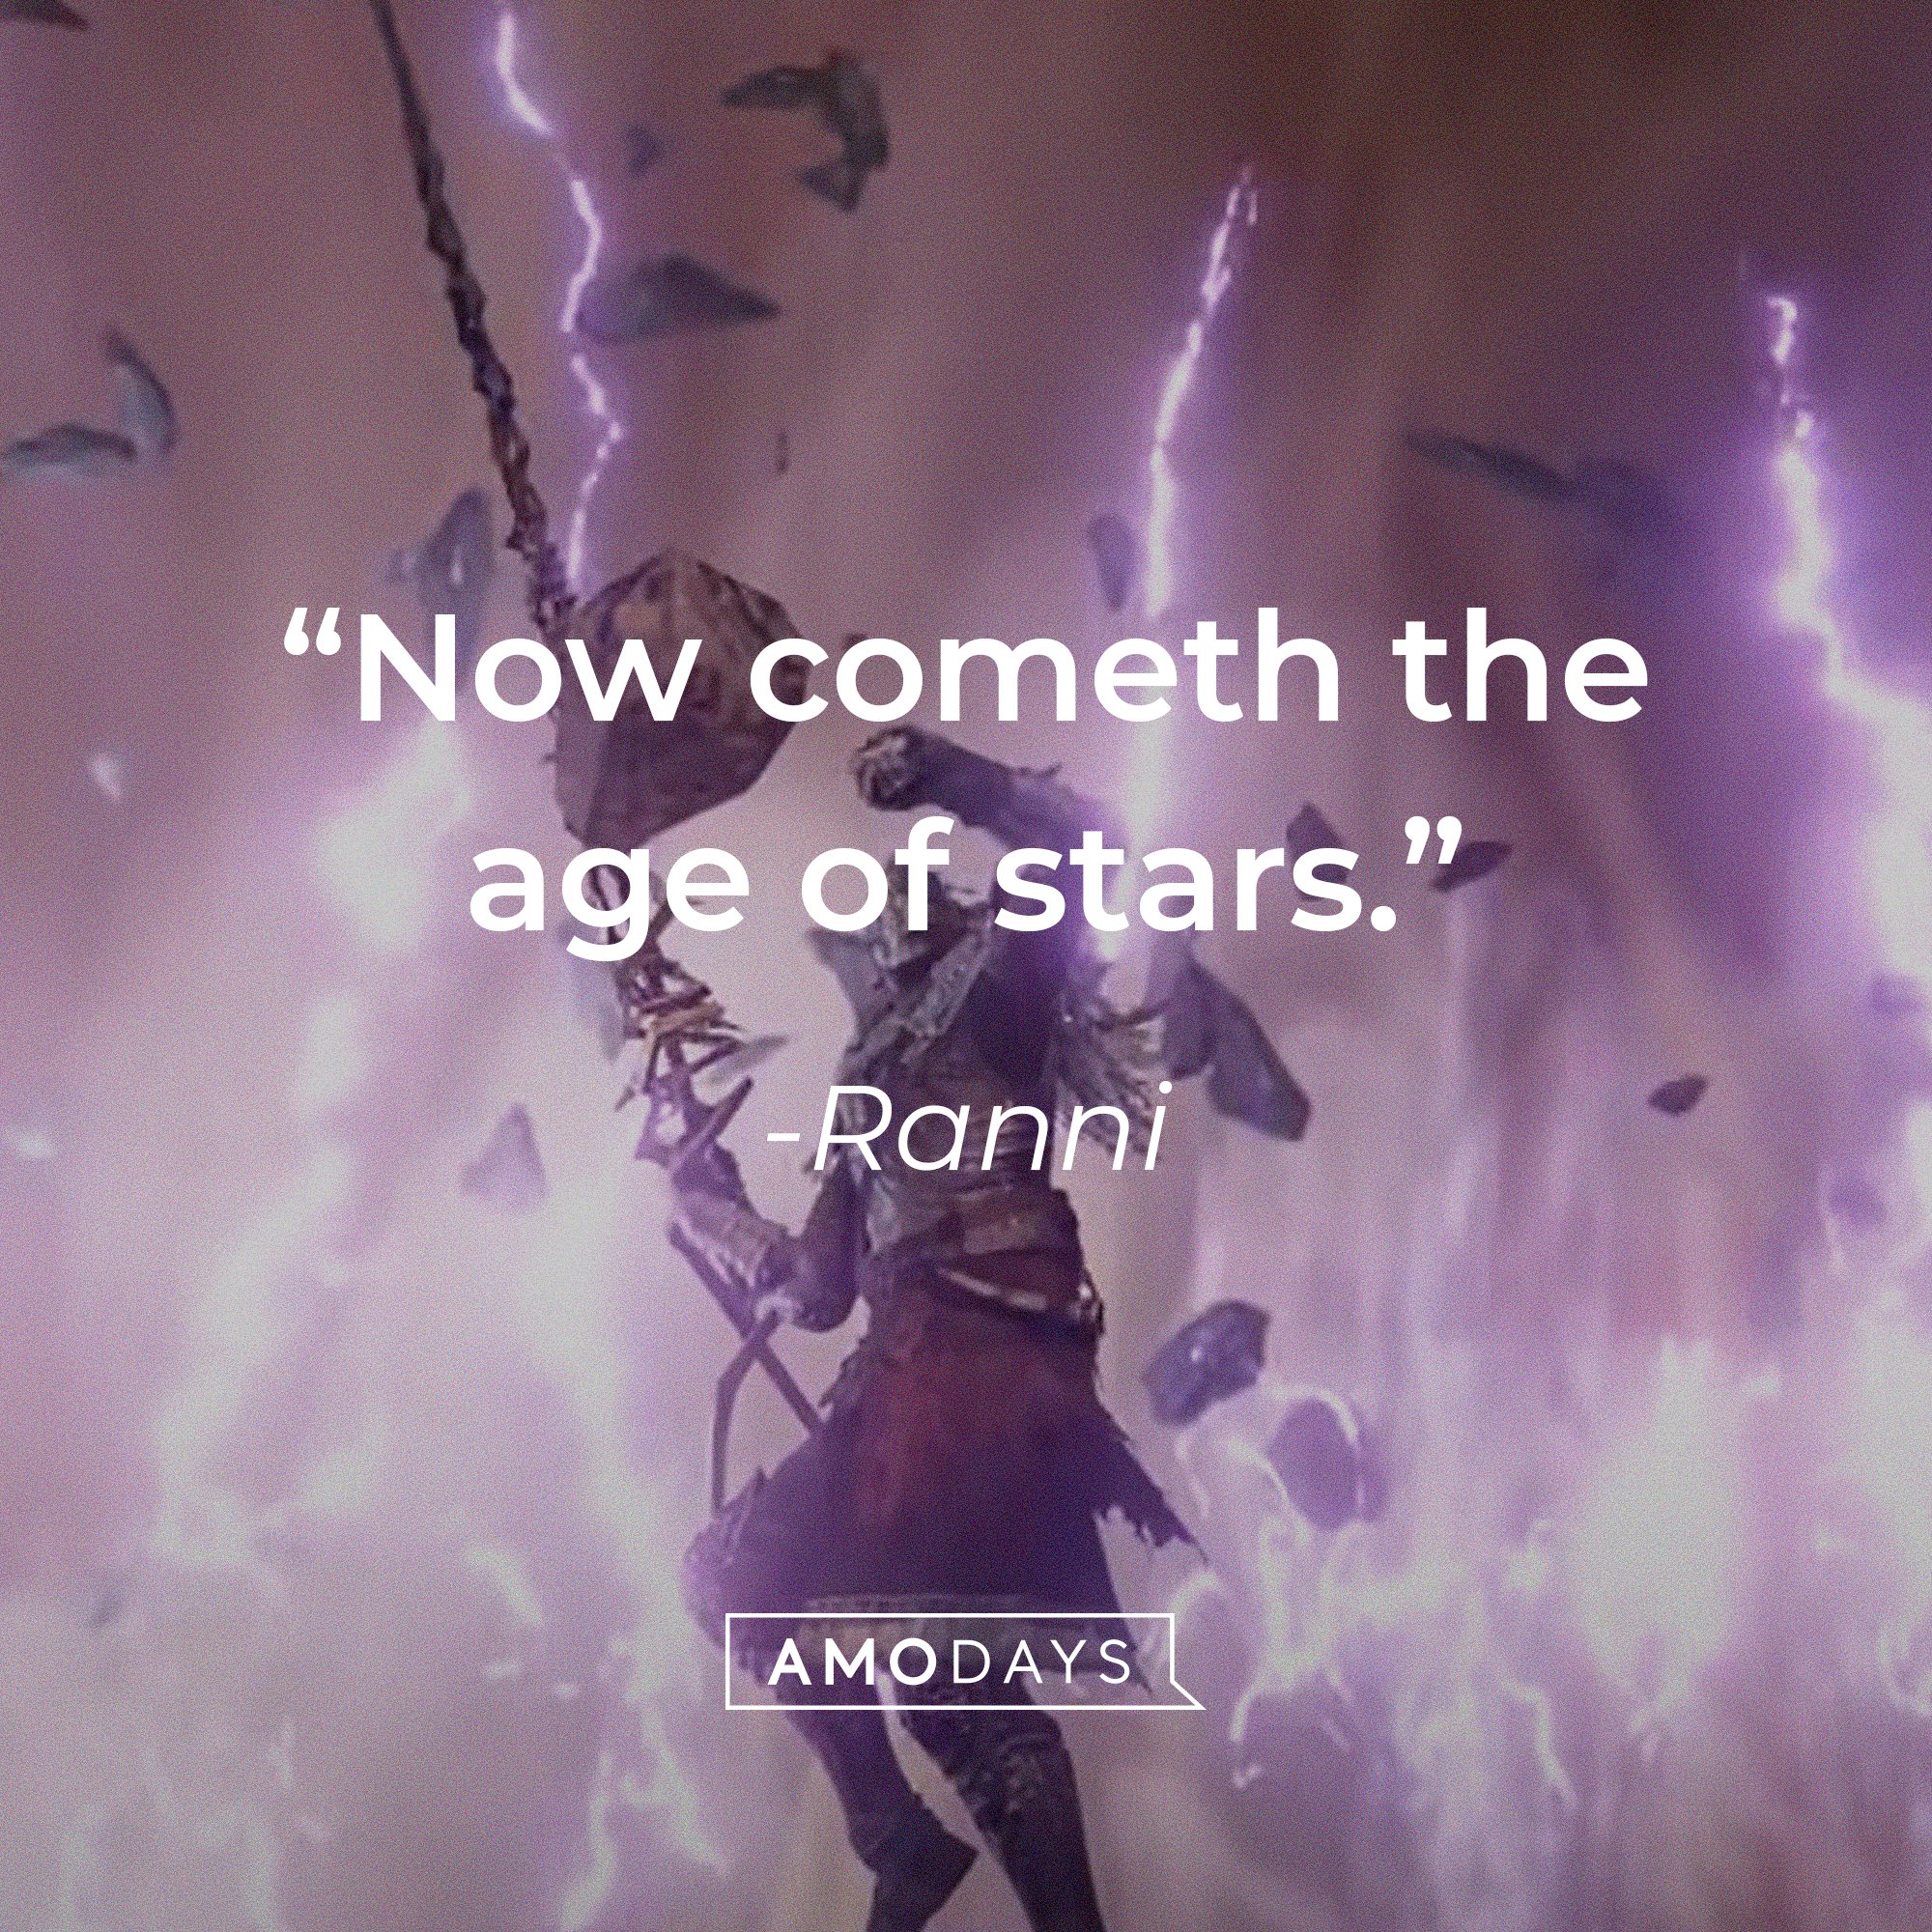 Ranni’s quote: "Now cometh the age of stars." | Image: AmoDays